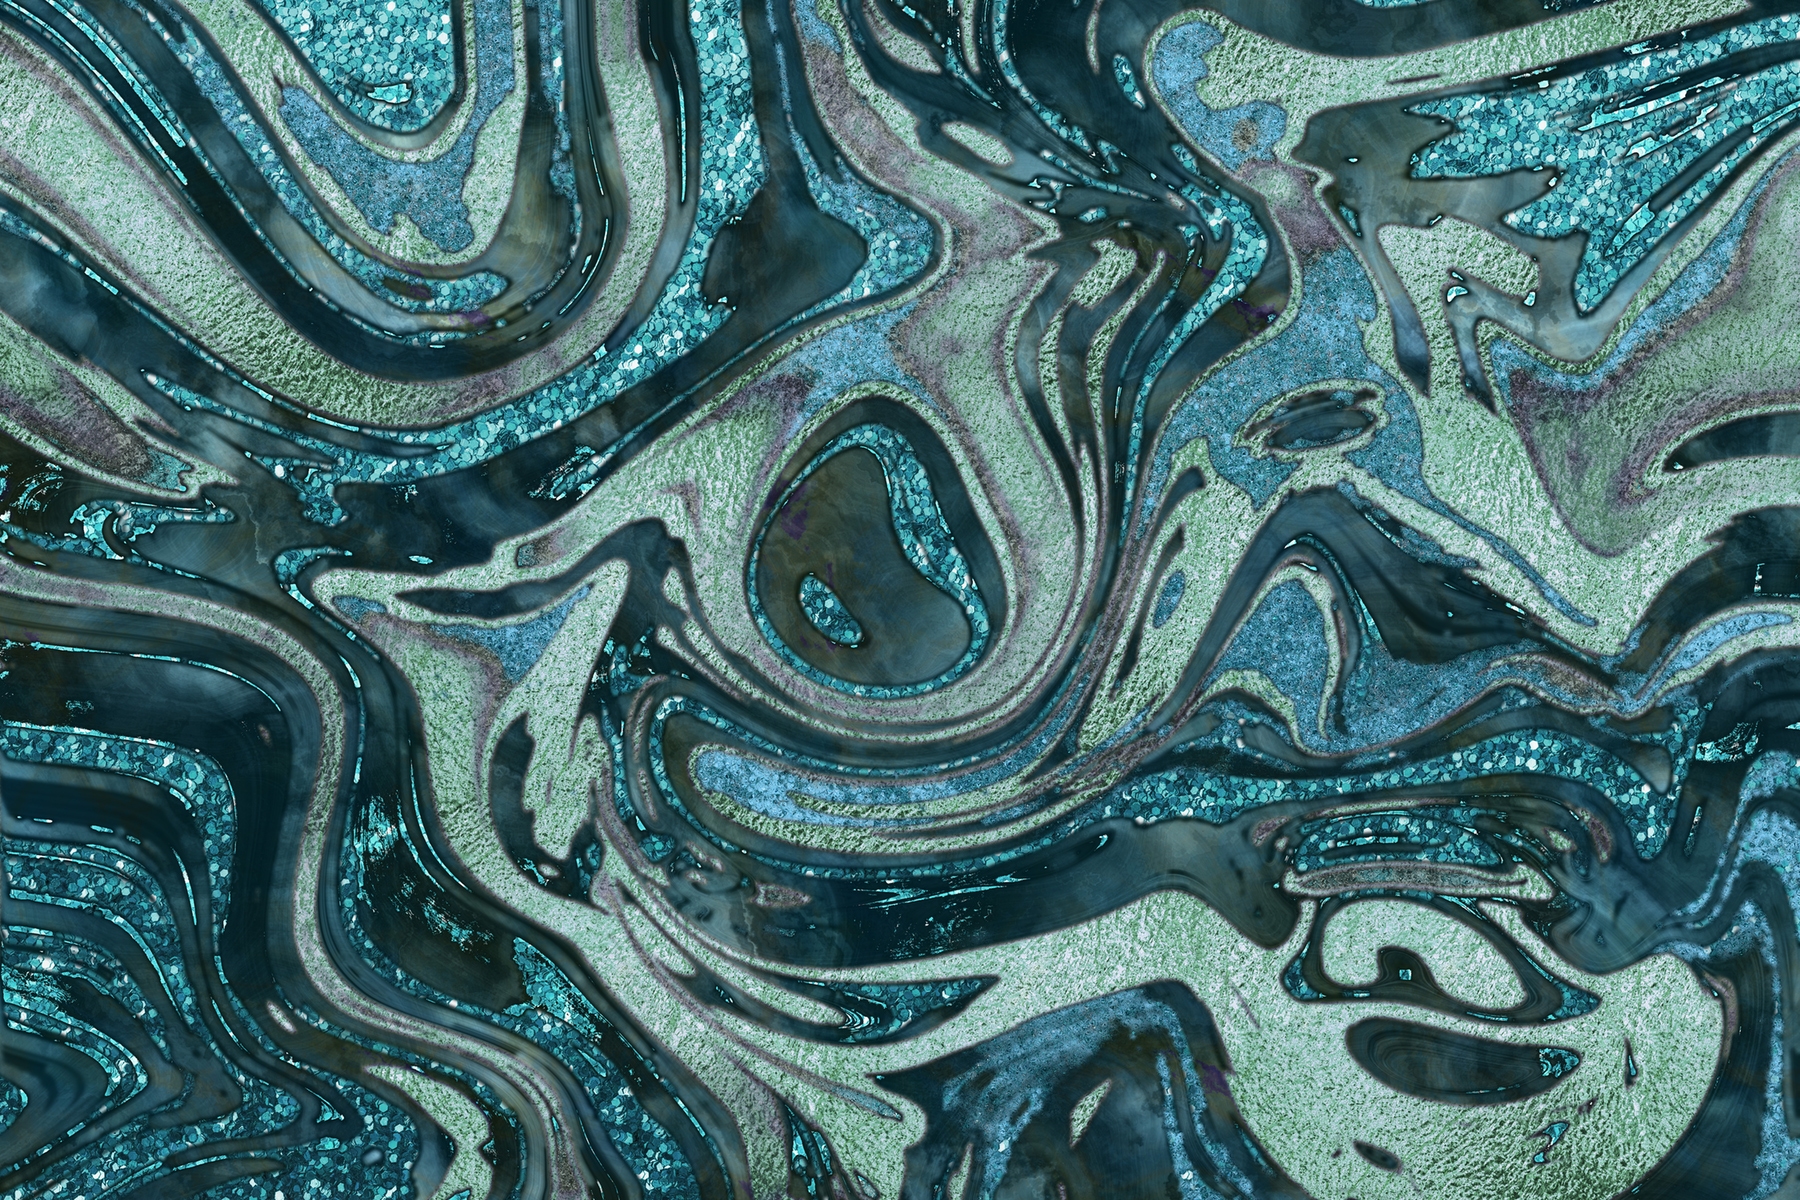 Teal Marble Background